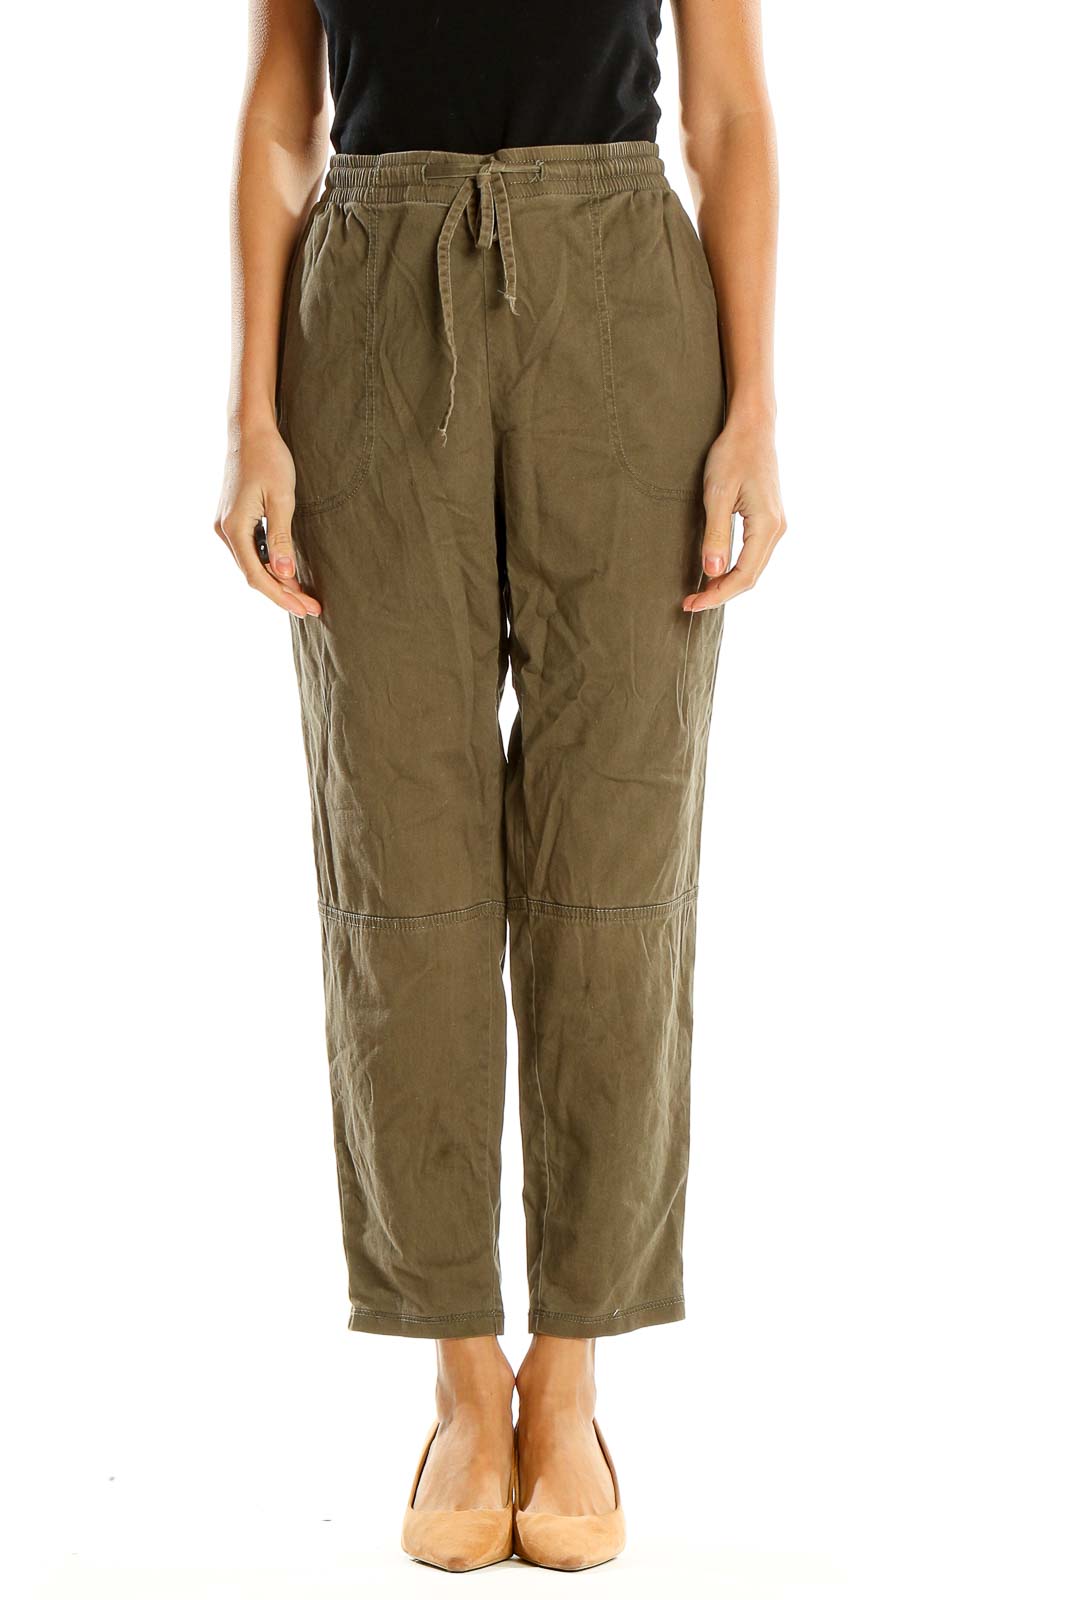 Brown Casual Cargos Pants Front